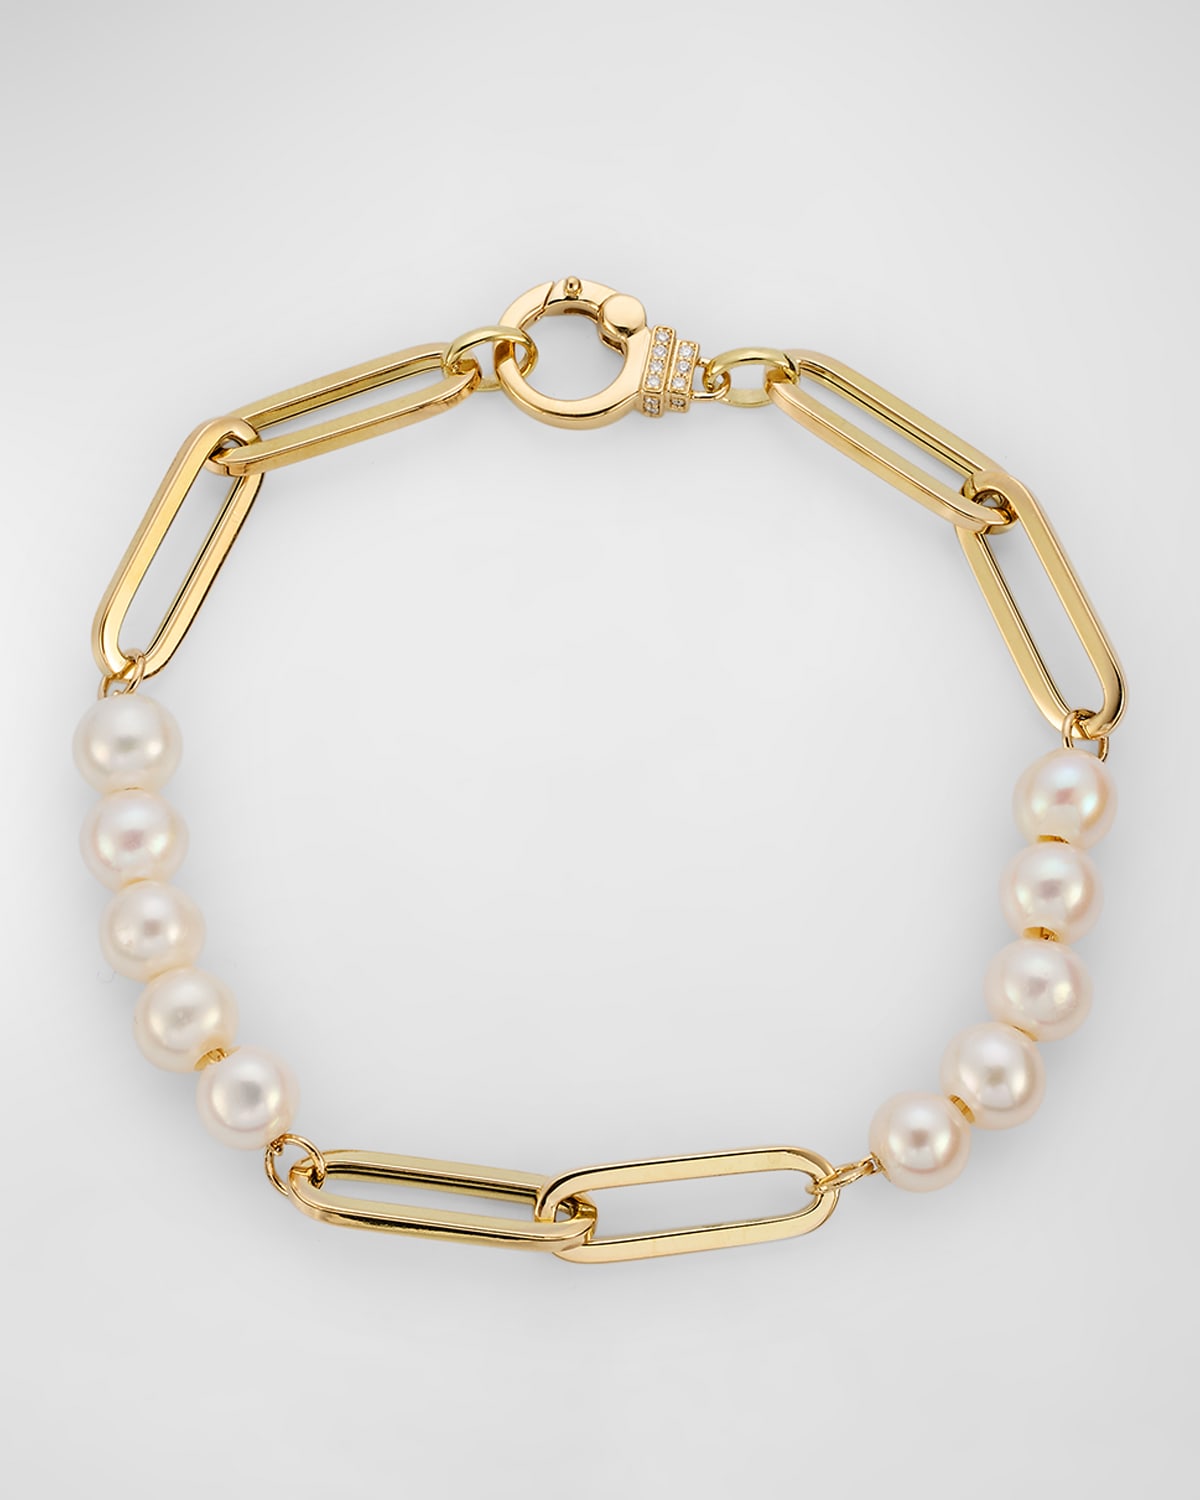 18K Yellow Gold Freshwater Pearl Bracelet with GH-SI Diamond Clasp, 7"L